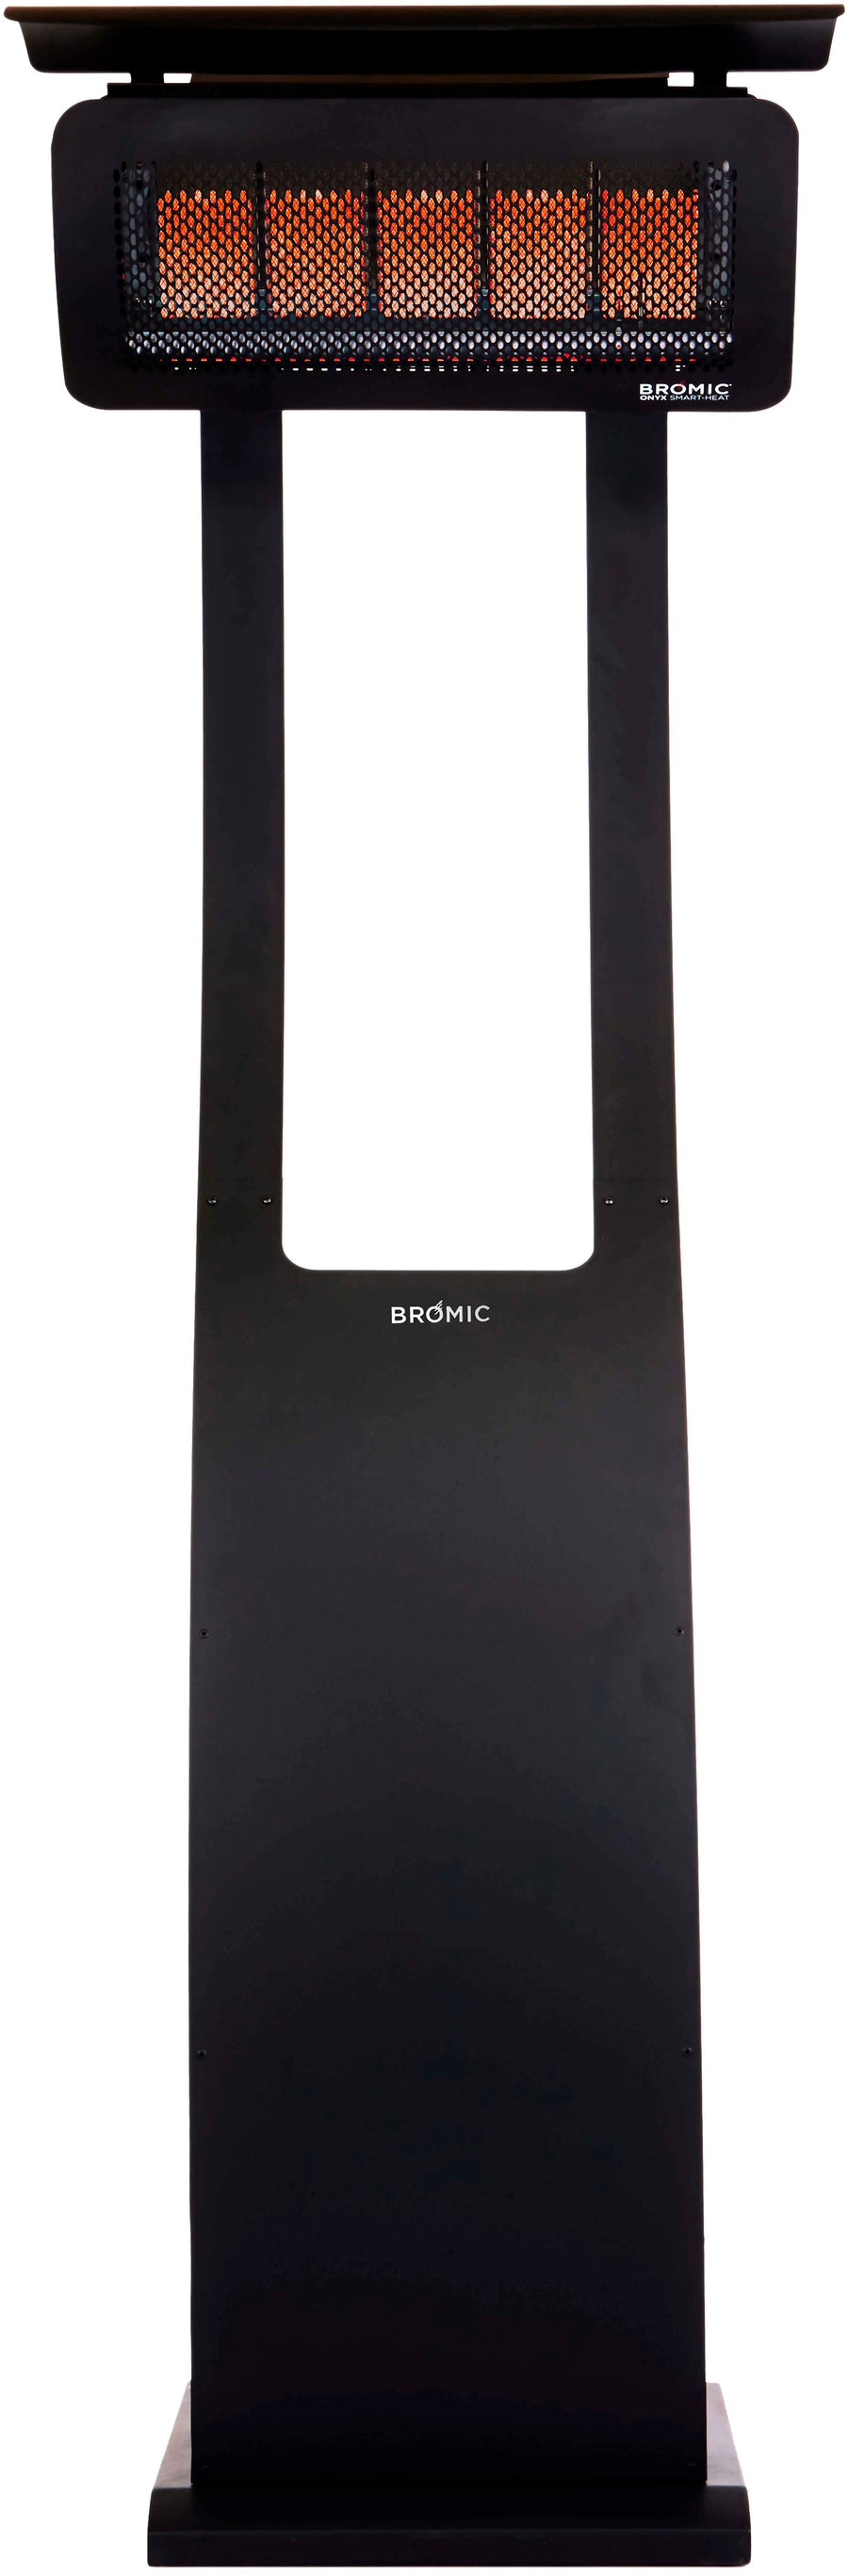 Bromic Heating - Portable Patio Heater - Tungsten Portable Stand Only - Black_0